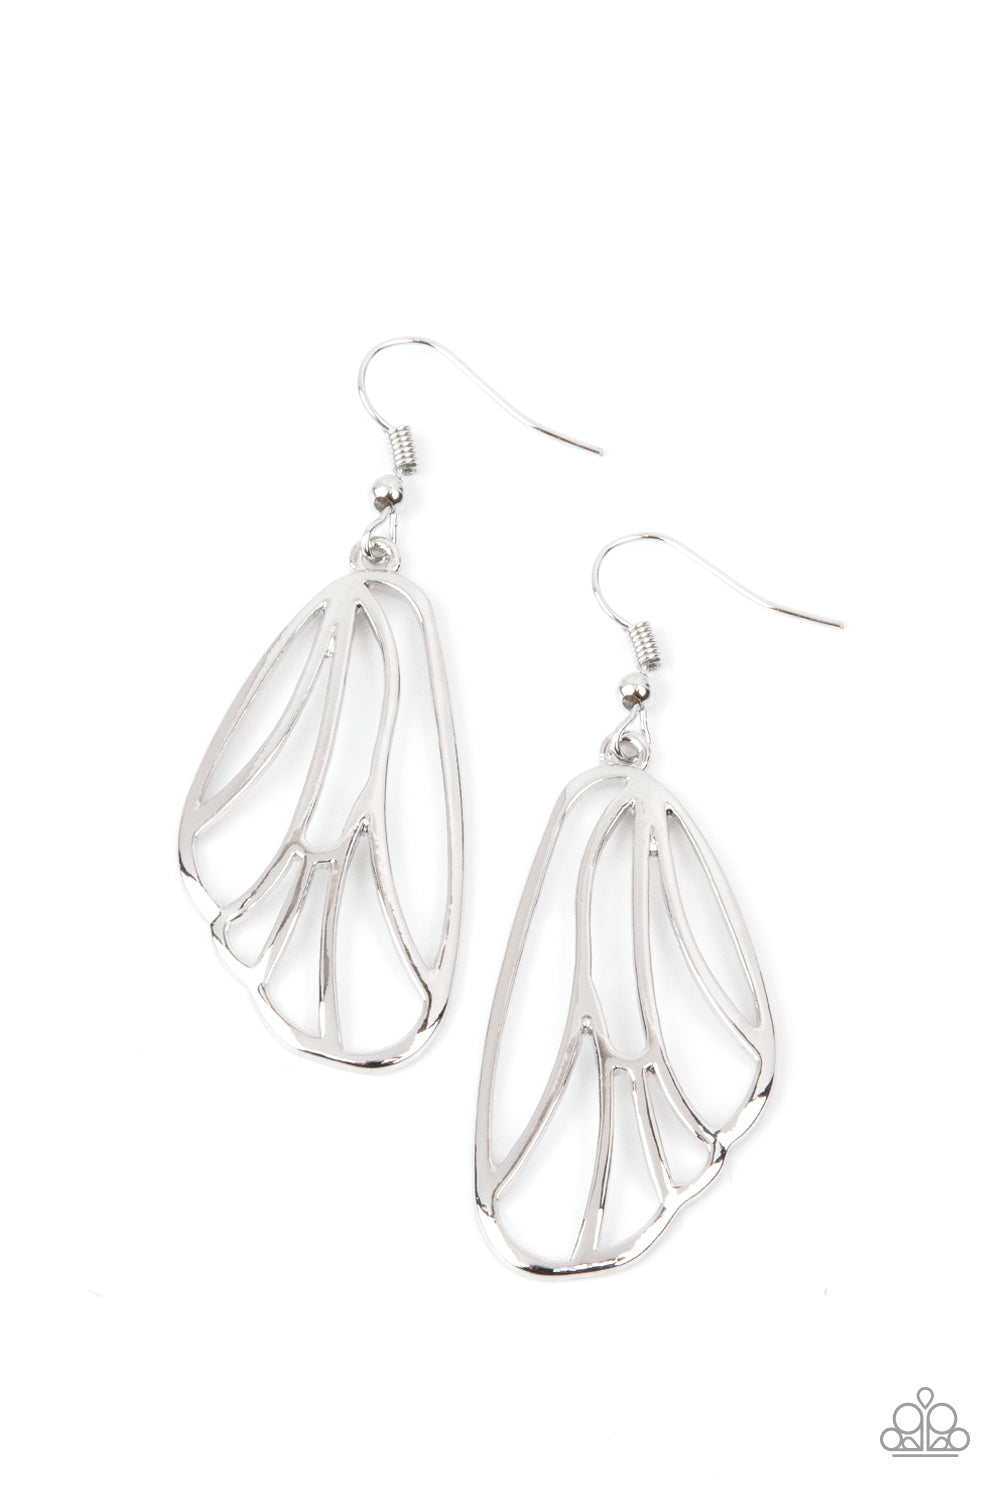 Paparazzi Accessories Turn Into a Butterfly - Silver Earrings - Lady T Accessories